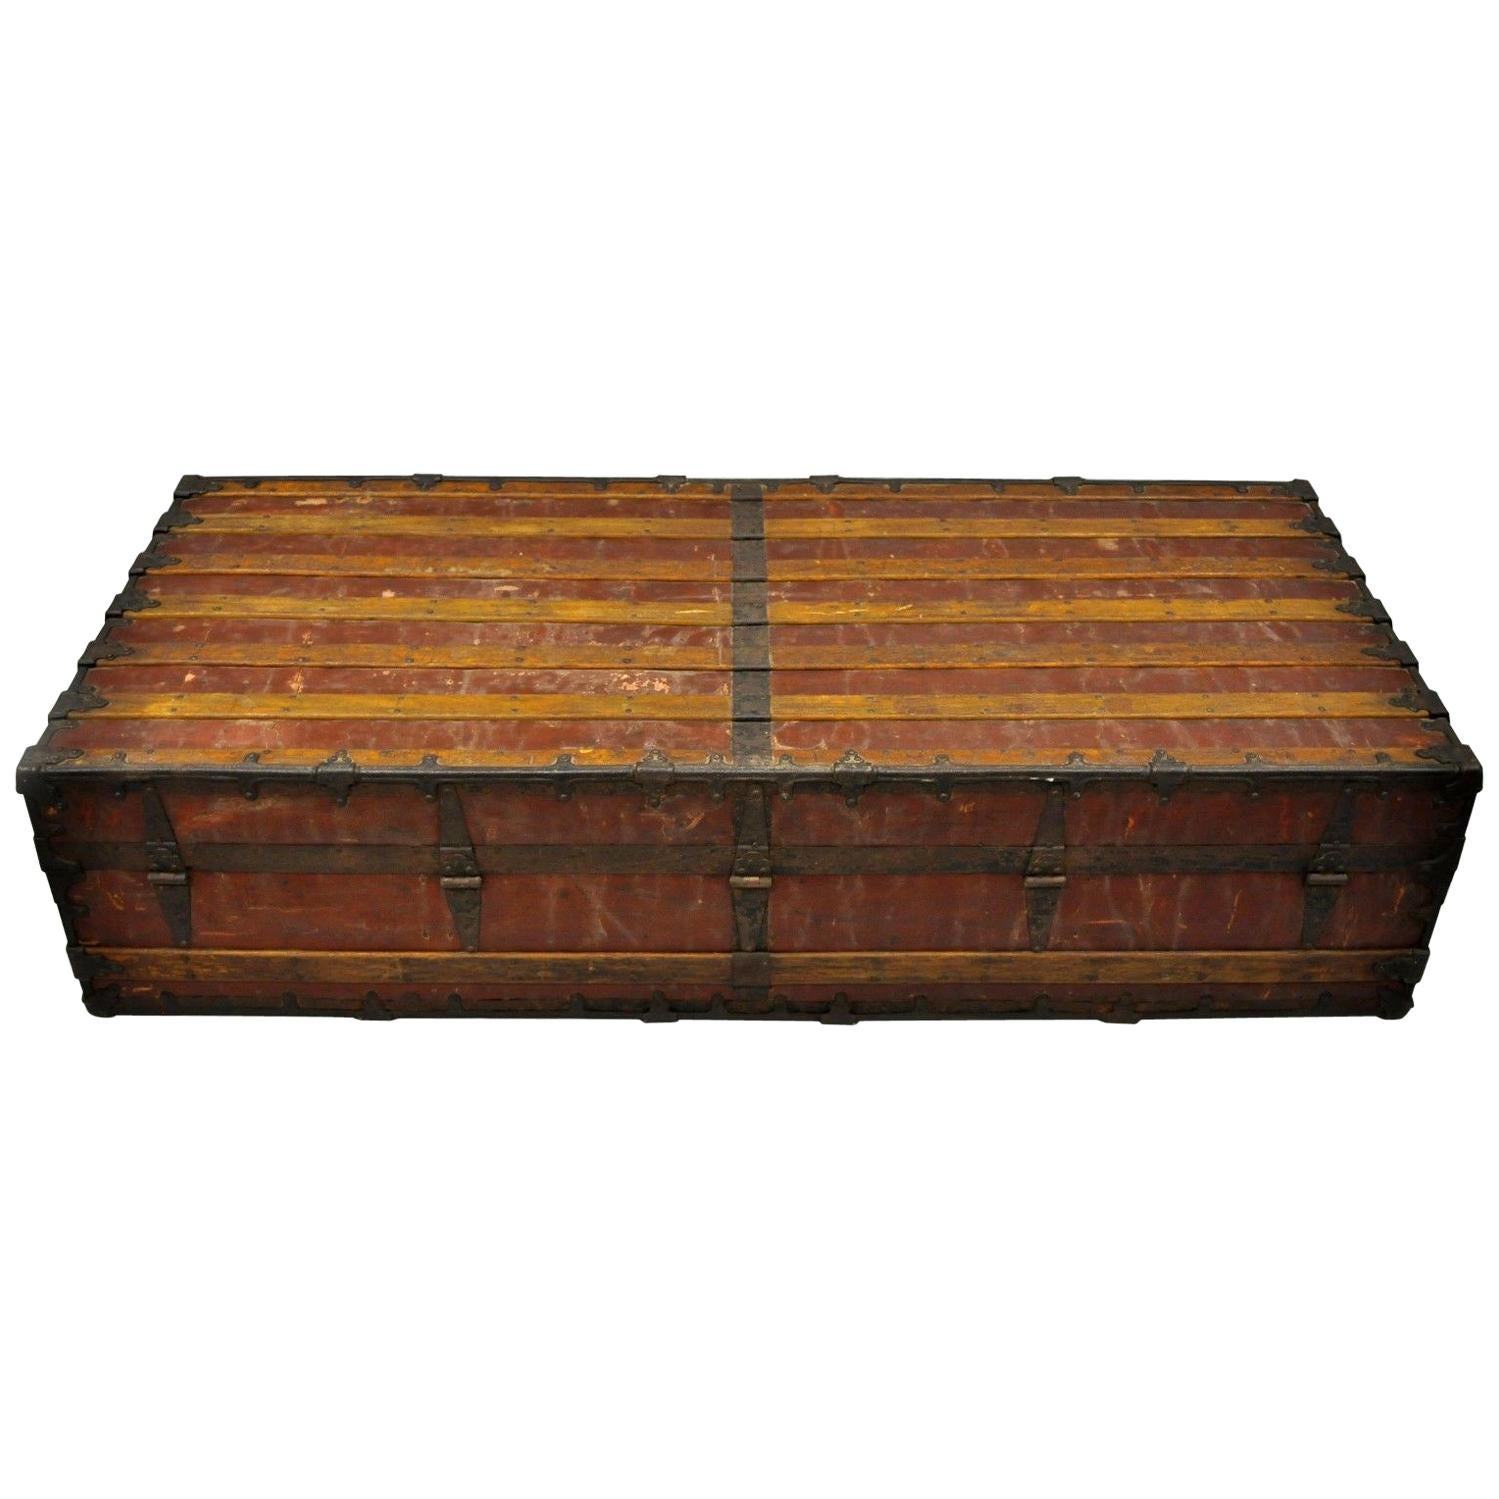 William BaL 61 XL Luggage Suitcase Steamer Trunk Wood Slat Chest Heumans  Houdini at 1stDibs | william bal trunk, steamer suitcase, luggage chest